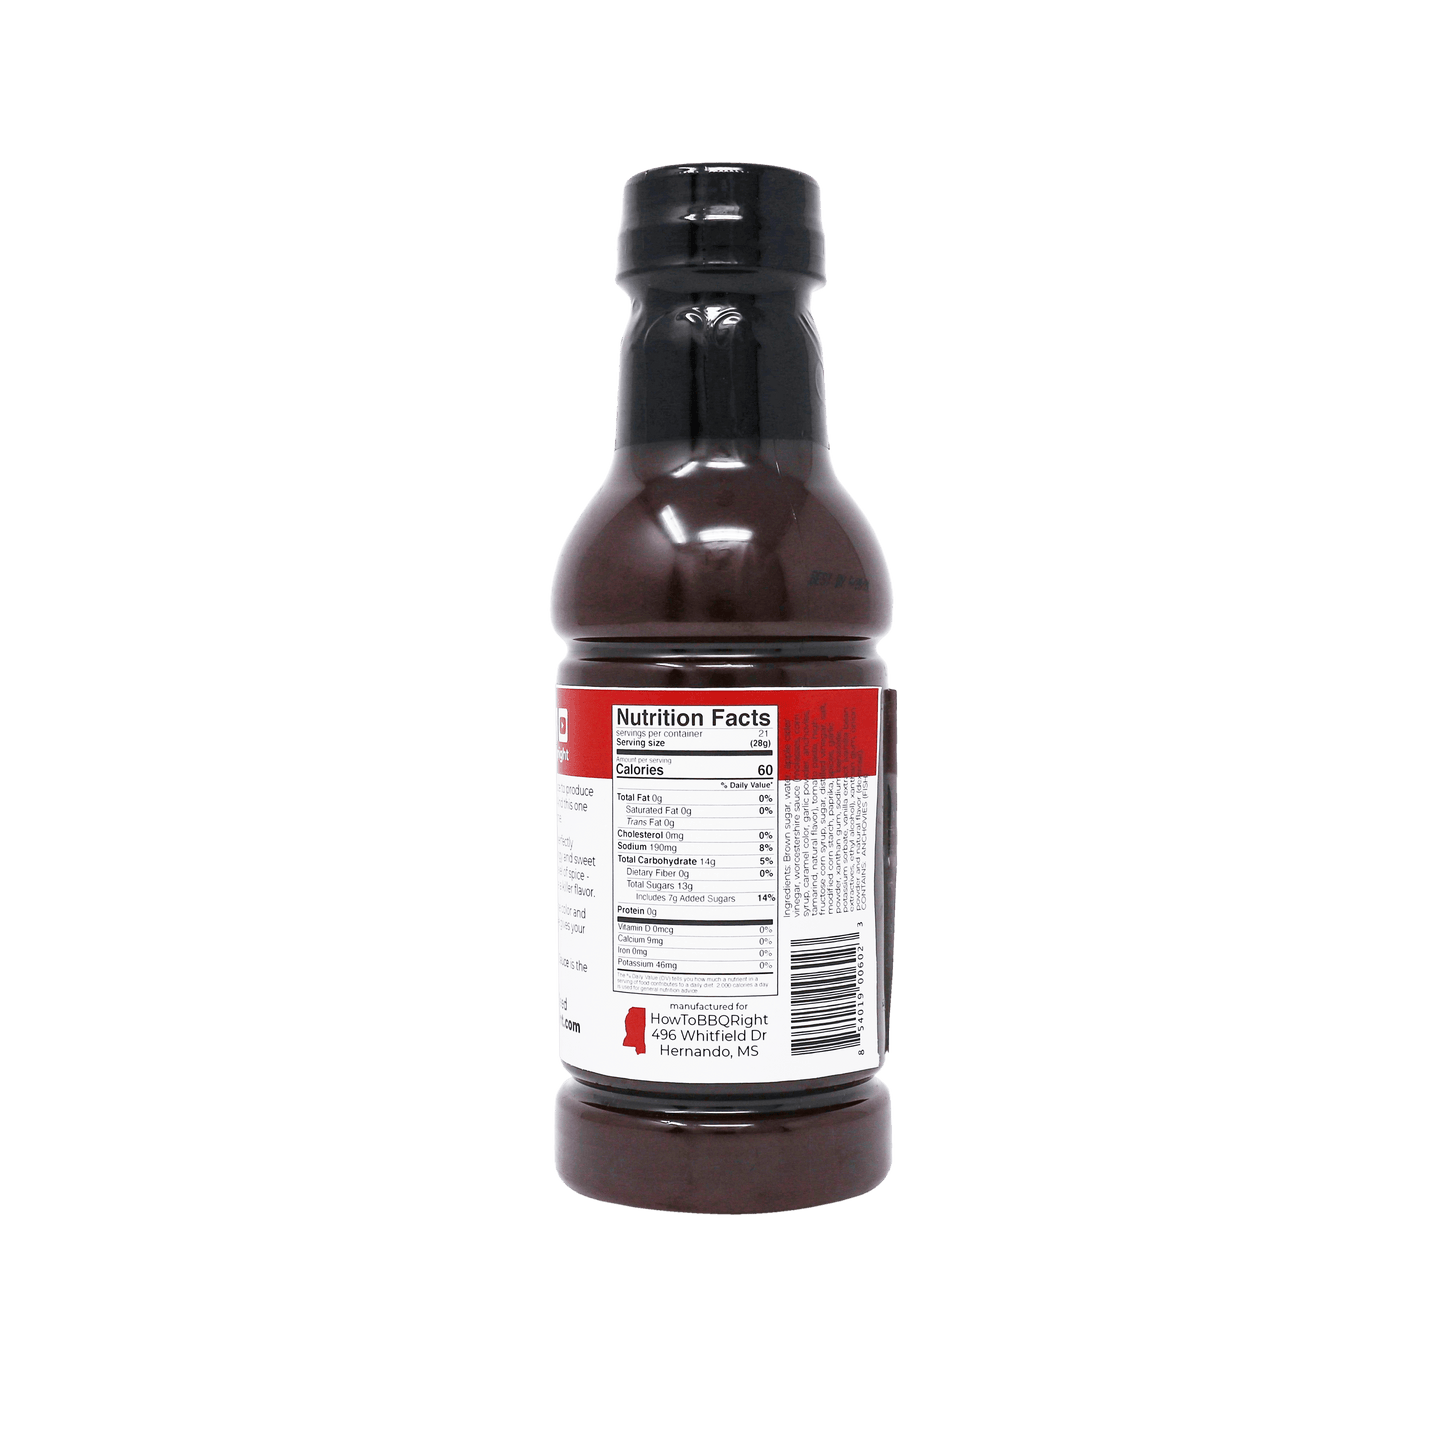 Killer Hogs The BBQ Sauce - Nutrition Facts